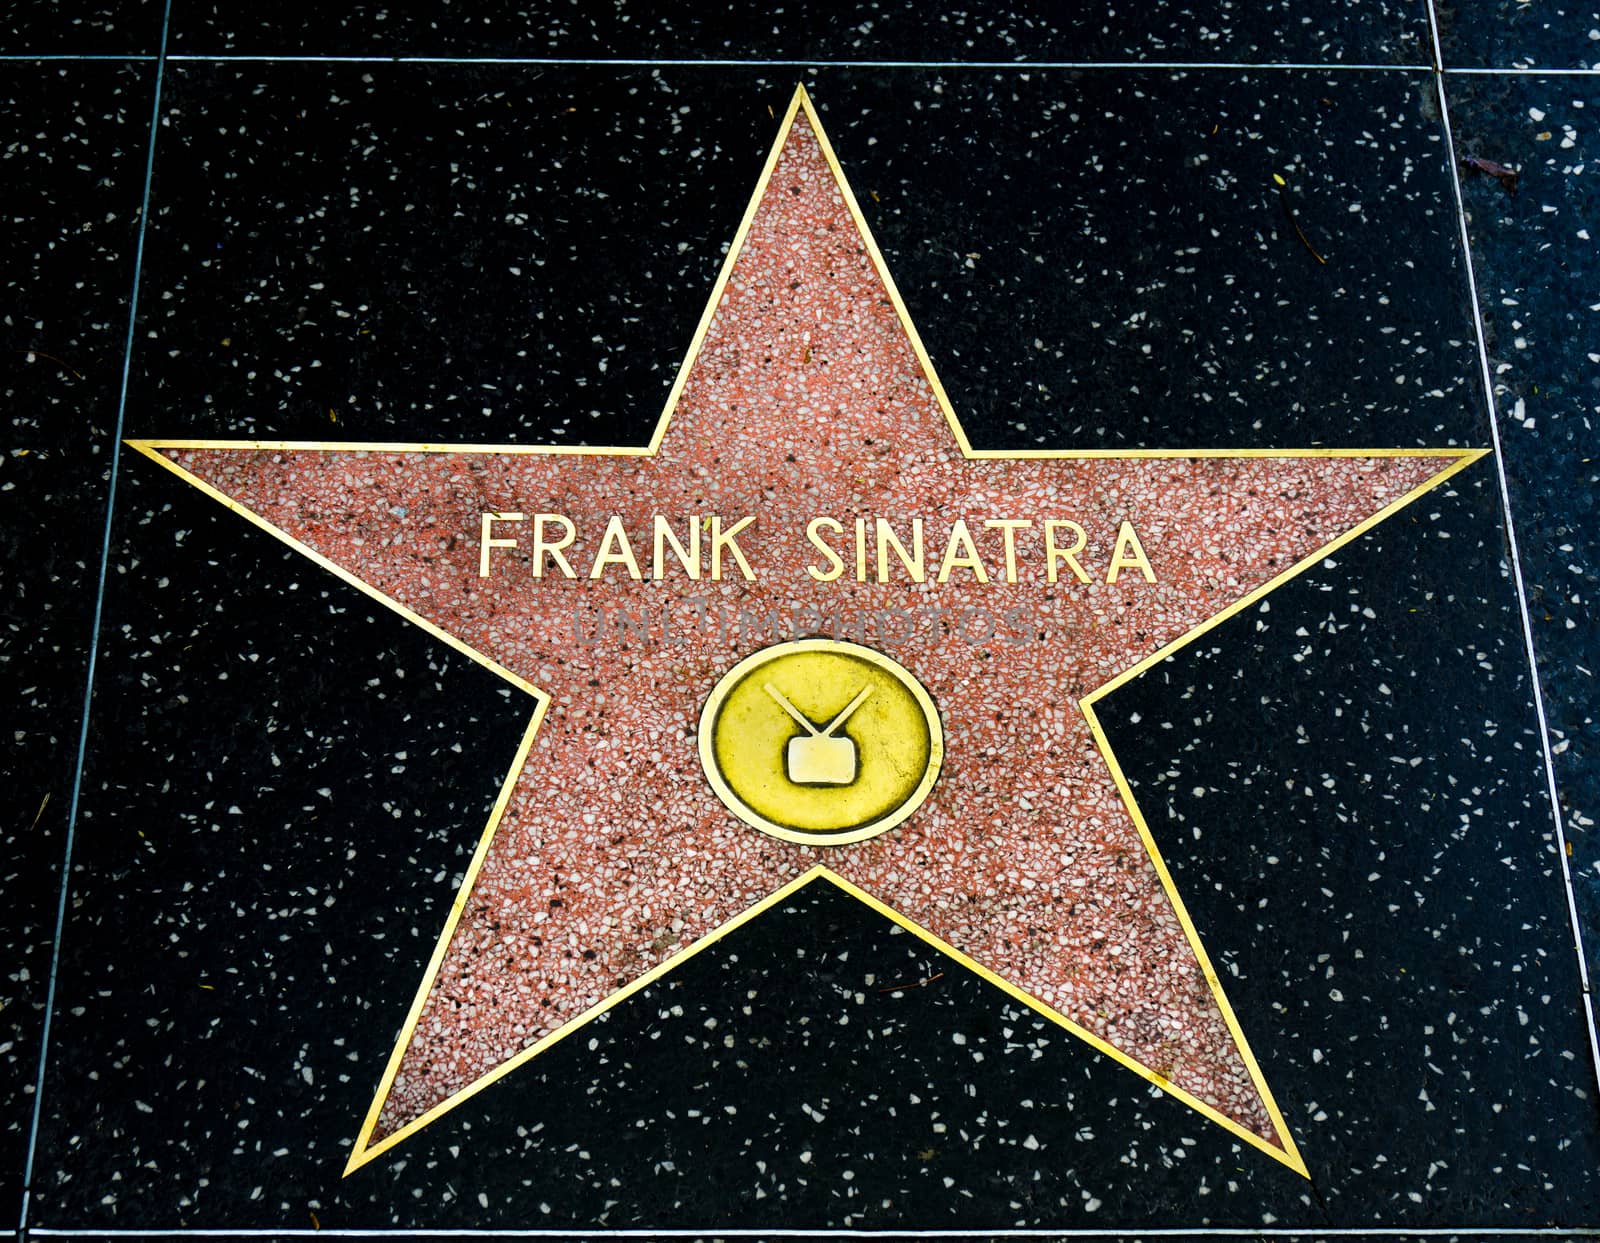 HOLLYWOOD, CA/USA - APRIL 18, 2015: Frank Sinatra star on the Hollywood walk of fame.